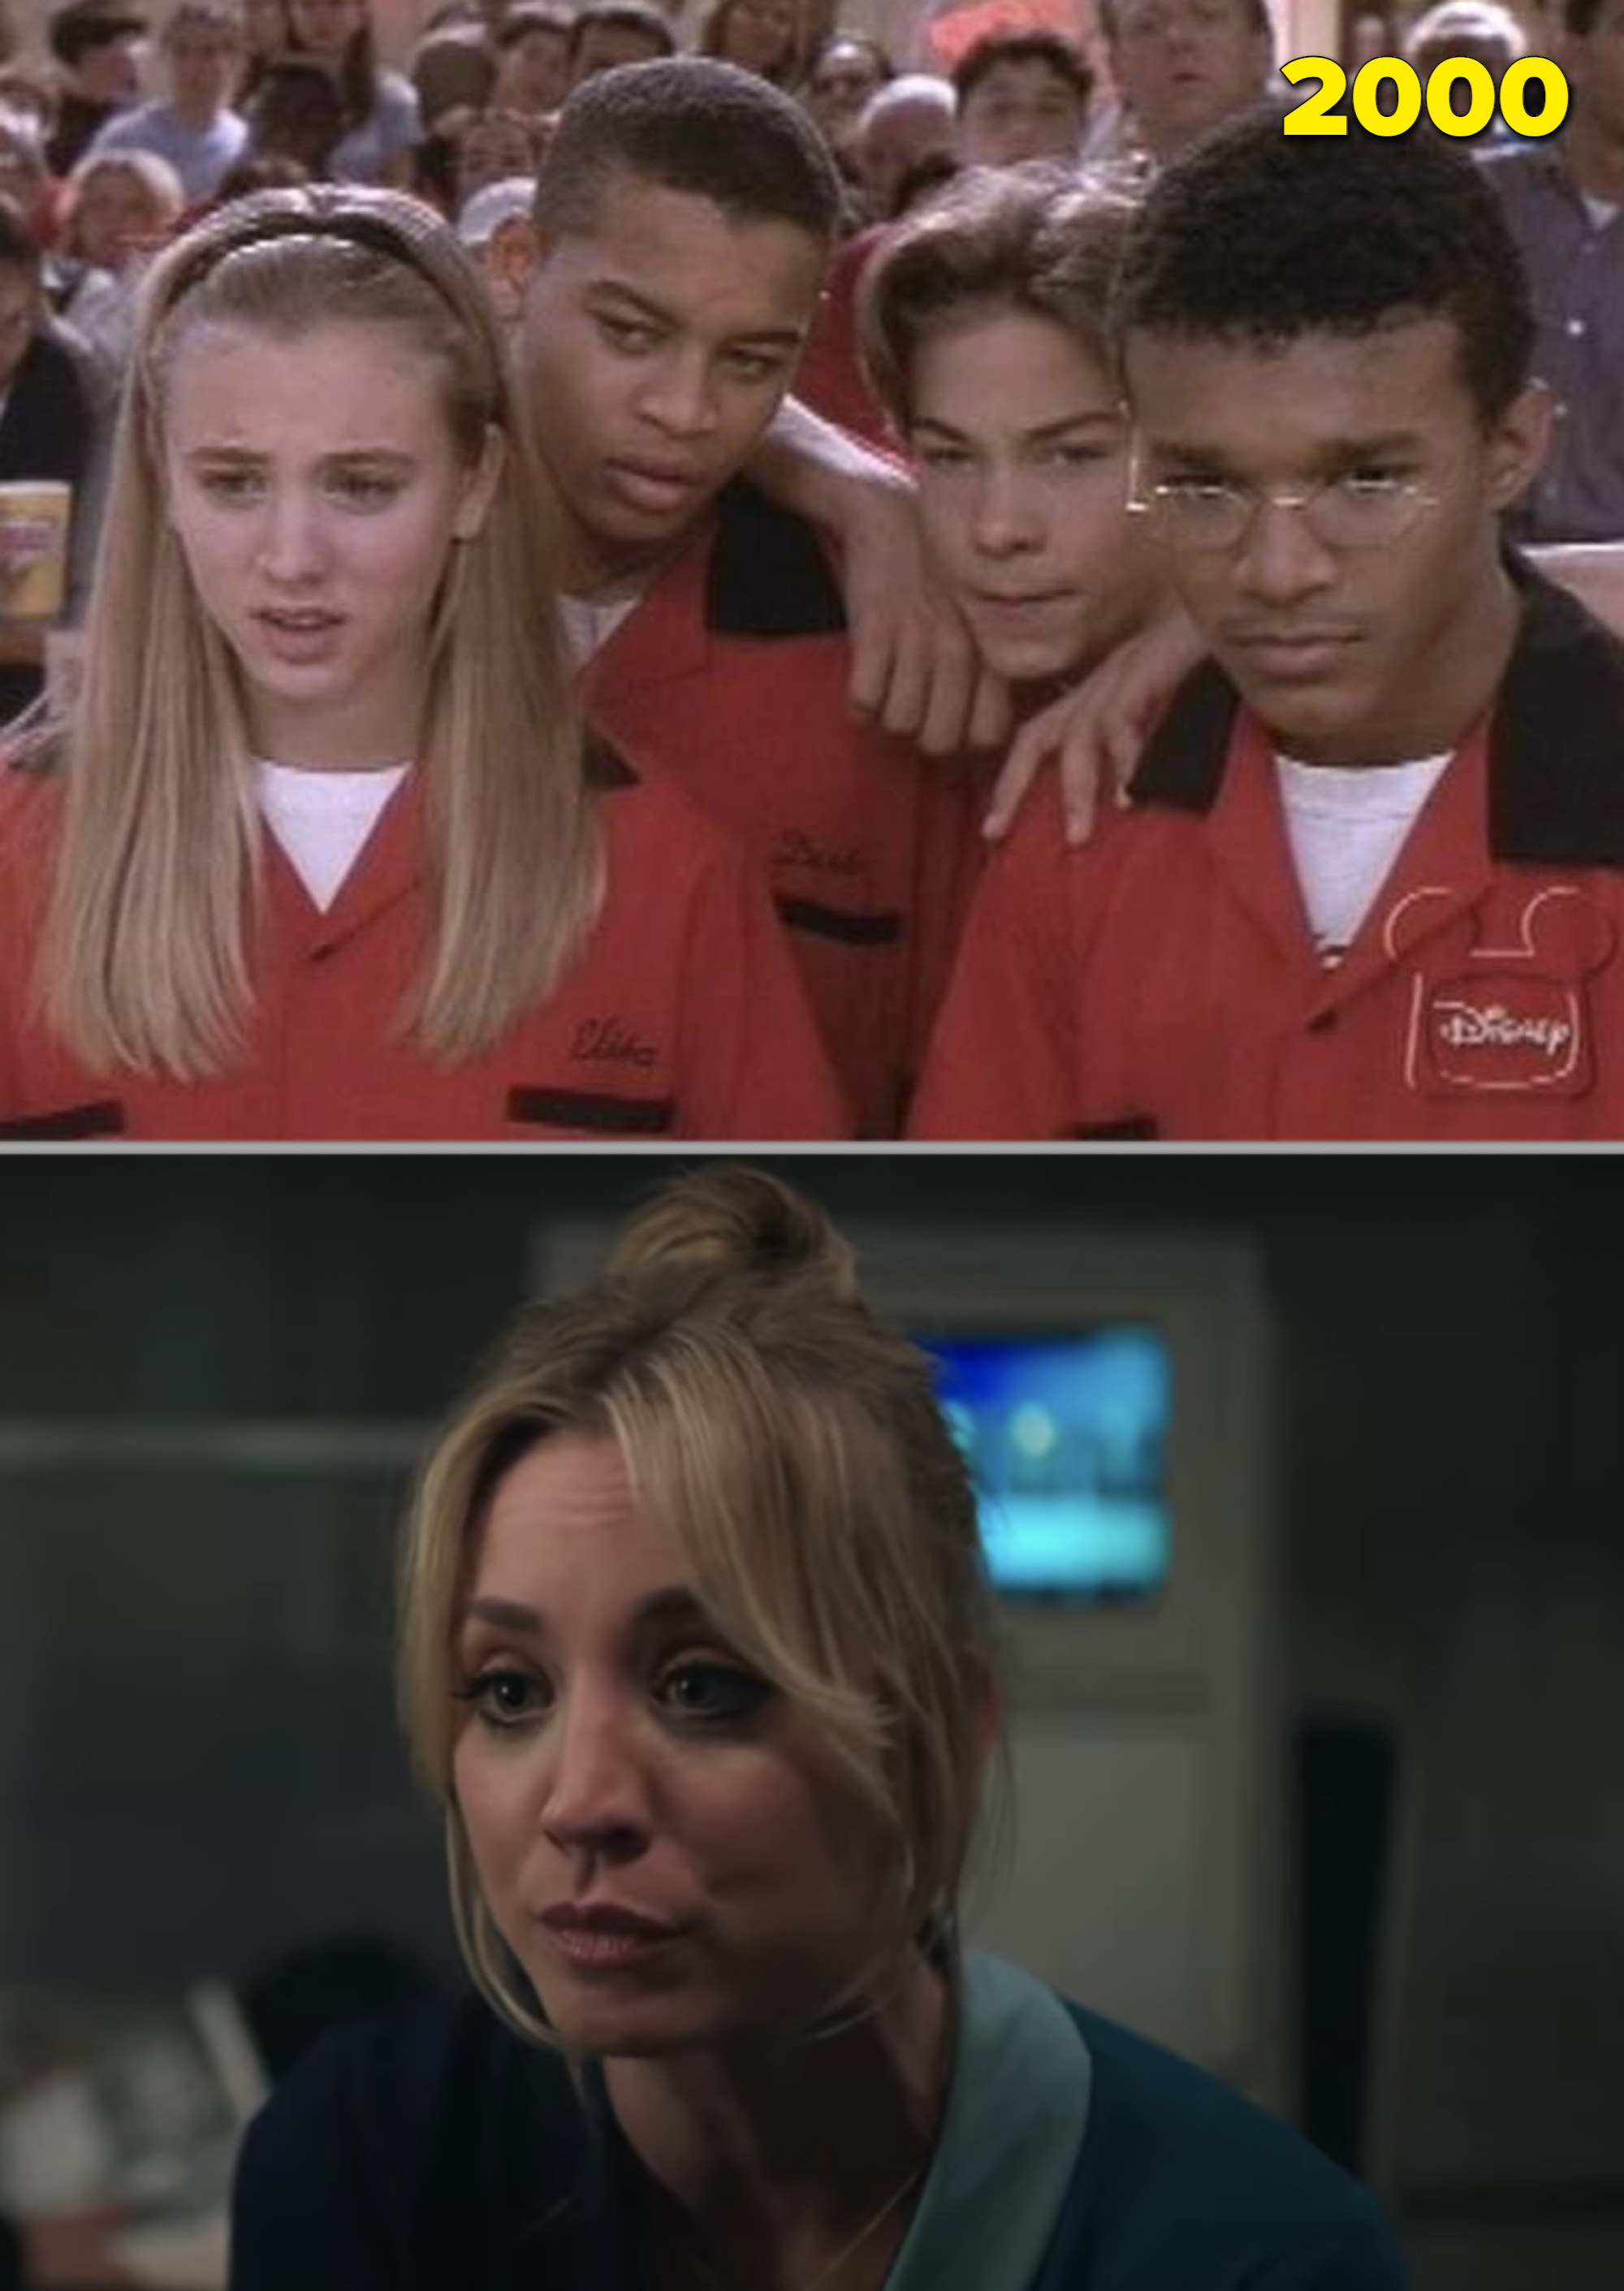 Kaley in a red bowling outfit and then her in a flight attendant uniform